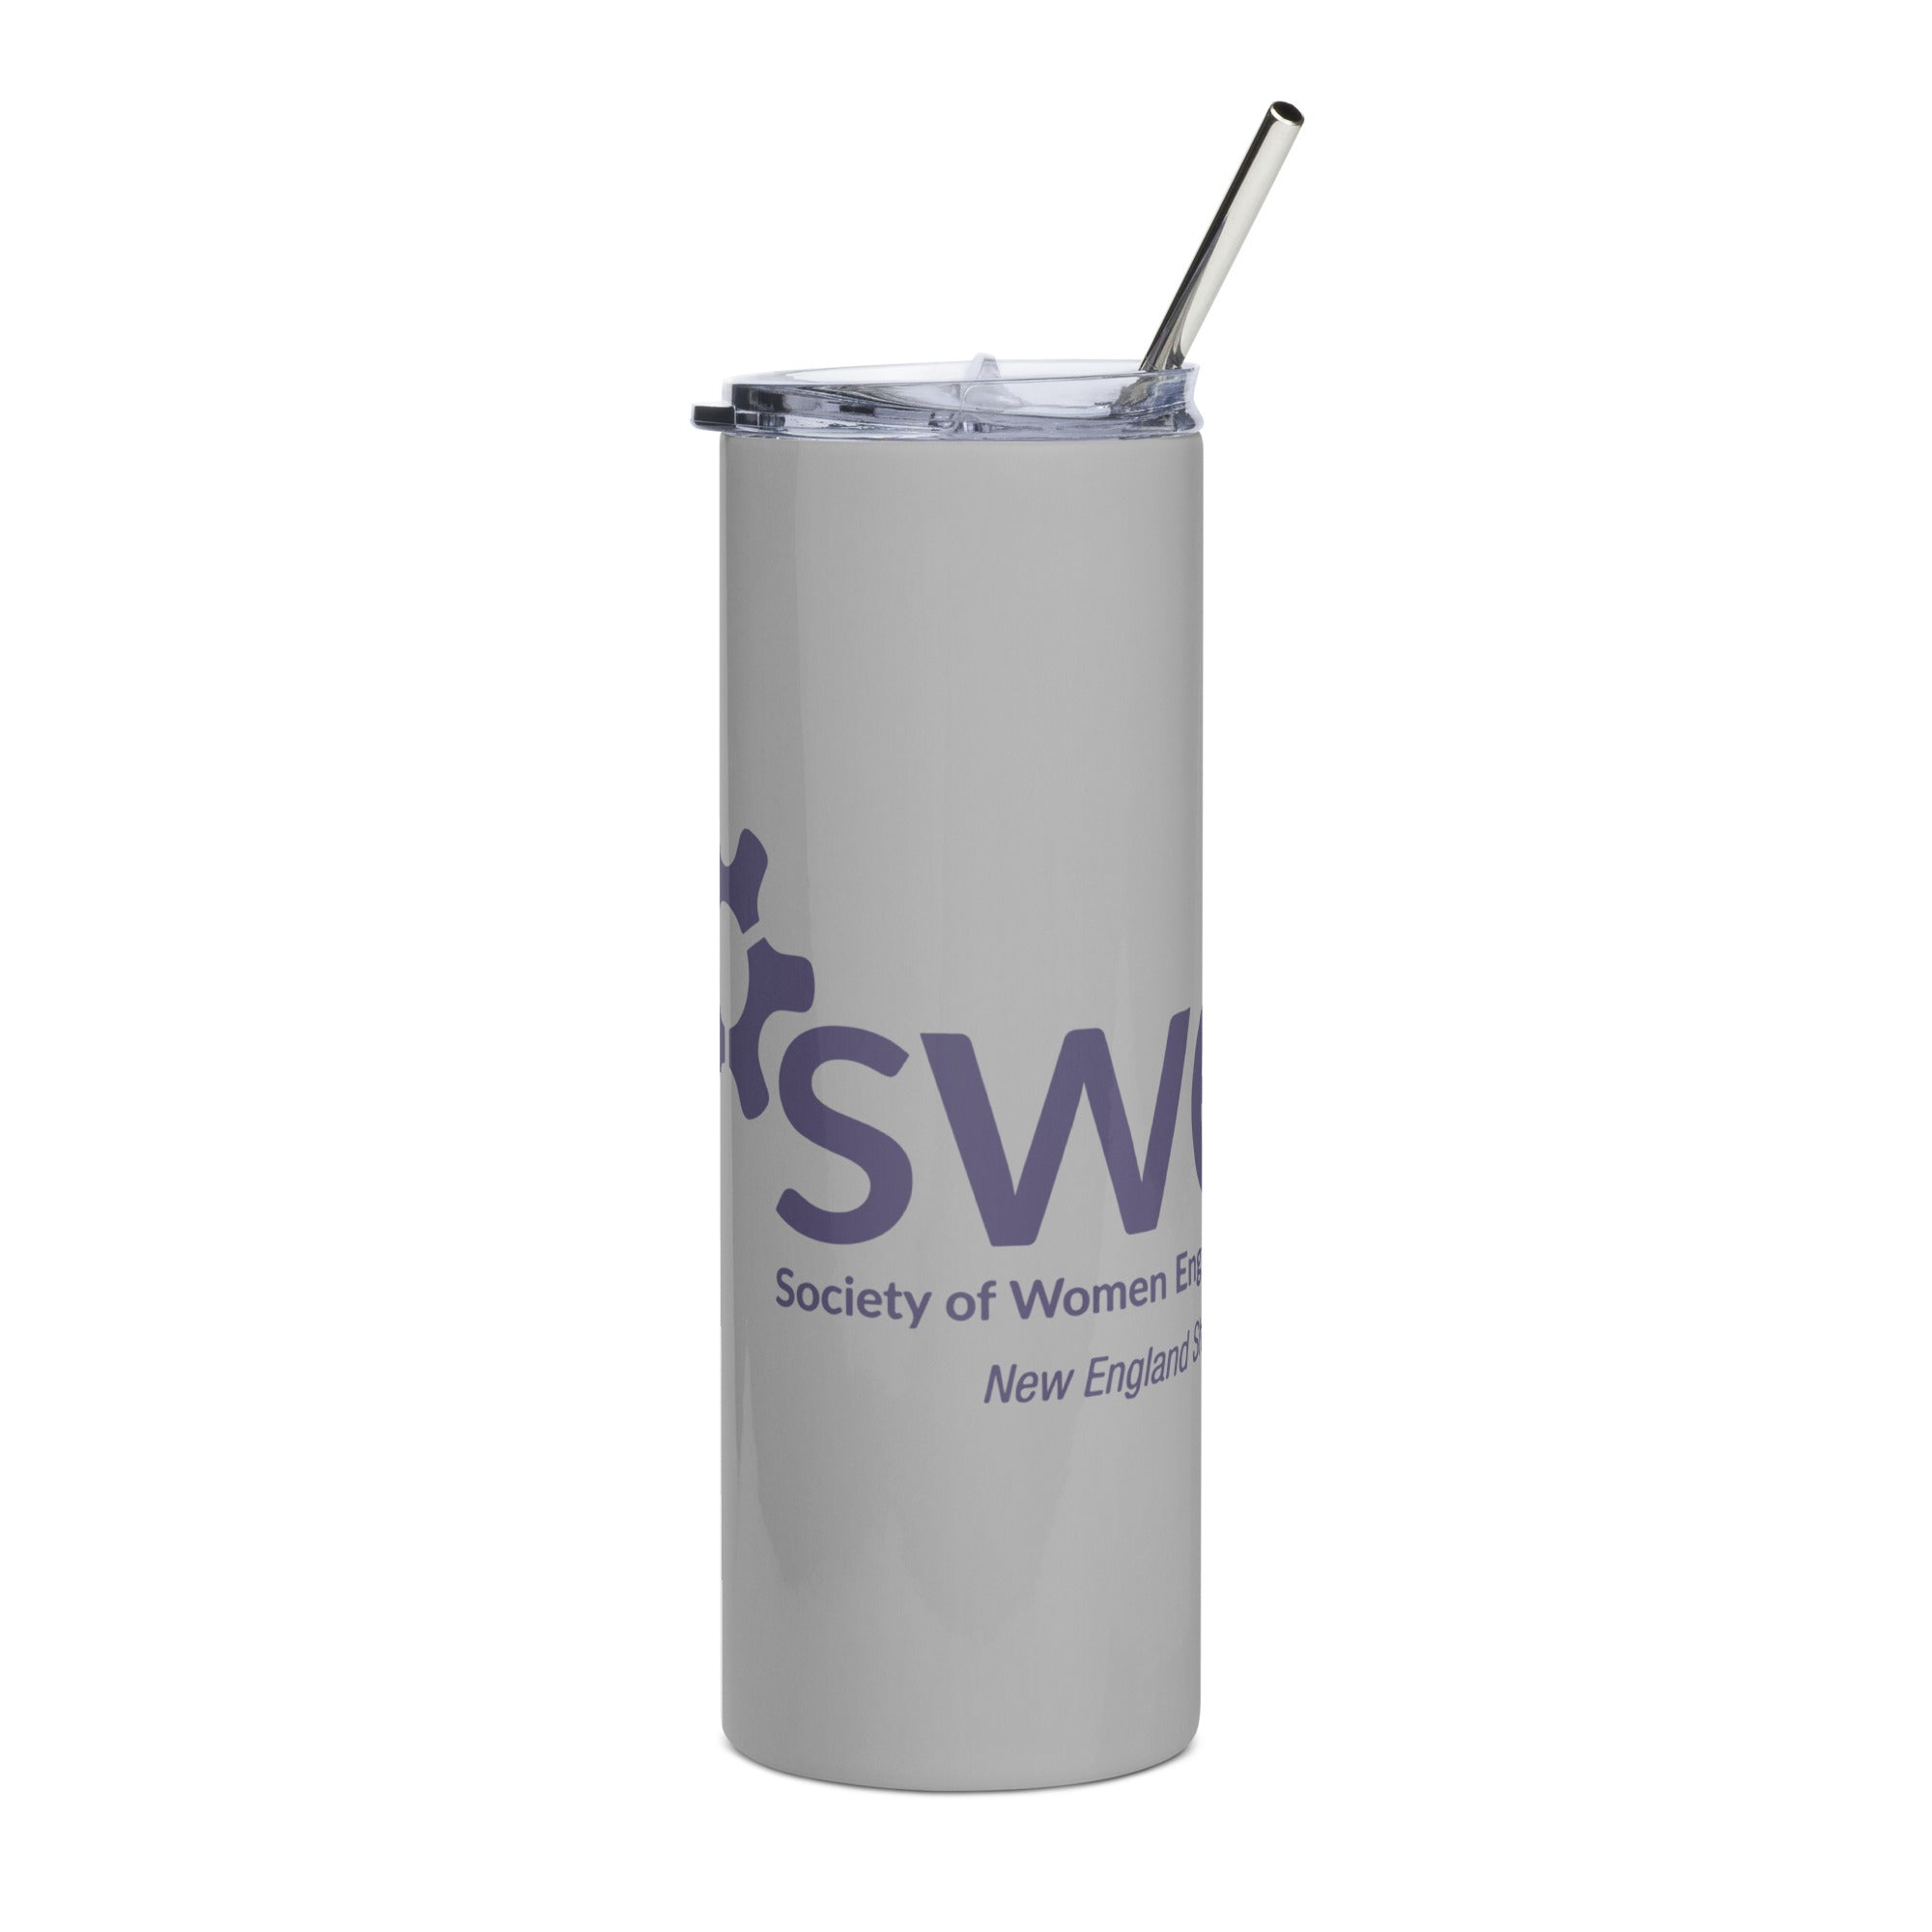 SWE NESS Stainless steel tumbler (Grey)